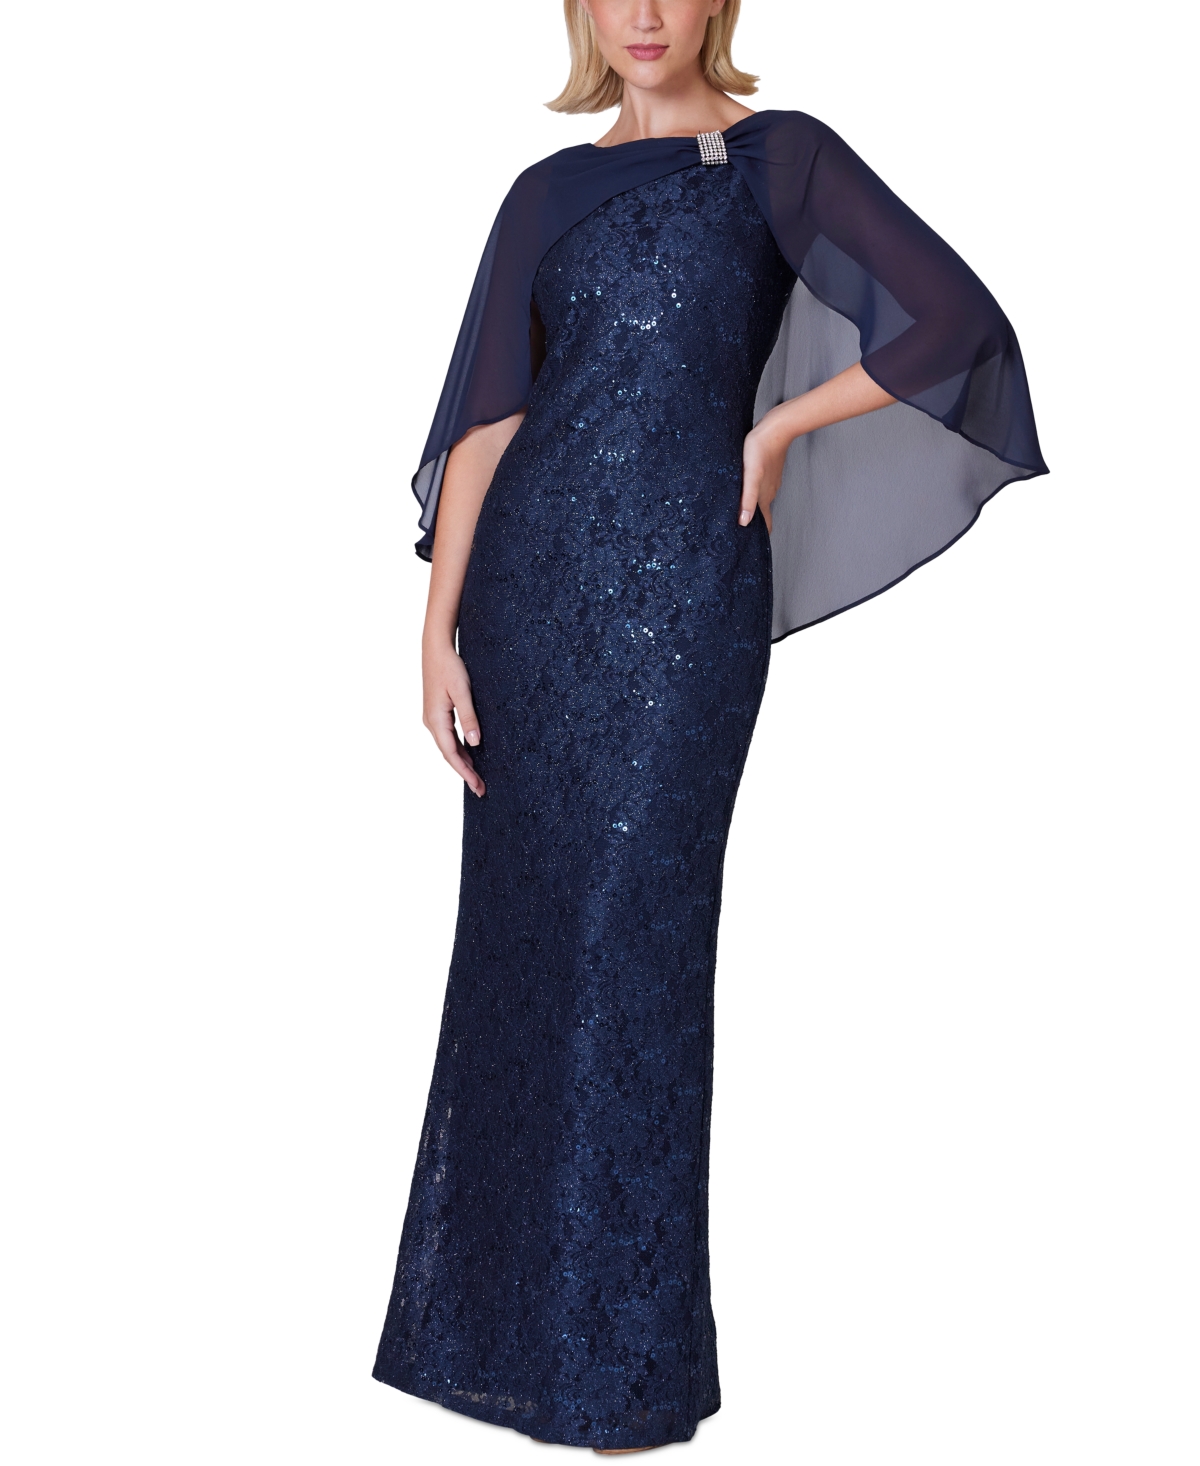 Women's Chiffon Capelet Lace Gown - Navy